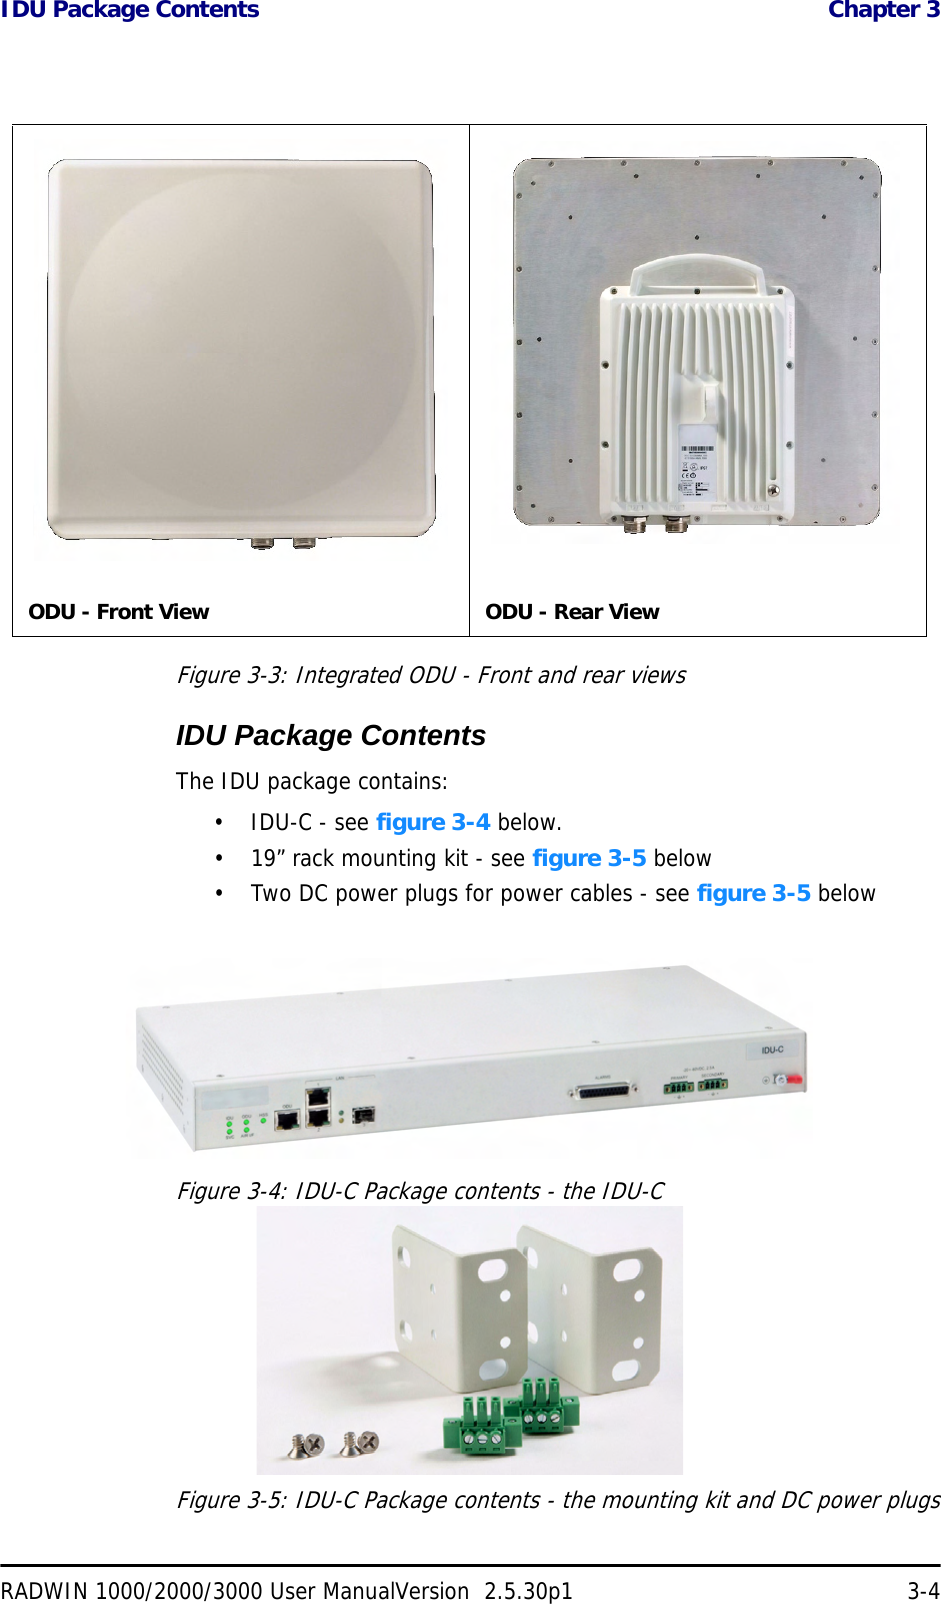 IDU Package Contents  Chapter 3RADWIN 1000/2000/3000 User ManualVersion  2.5.30p1 3-4Figure 3-3: Integrated ODU - Front and rear viewsIDU Package ContentsThe IDU package contains:• IDU-C - see figure 3-4 below.• 19” rack mounting kit - see figure 3-5 below• Two DC power plugs for power cables - see figure 3-5 belowFigure 3-4: IDU-C Package contents - the IDU-CFigure 3-5: IDU-C Package contents - the mounting kit and DC power plugsODU - Front View ODU - Rear View